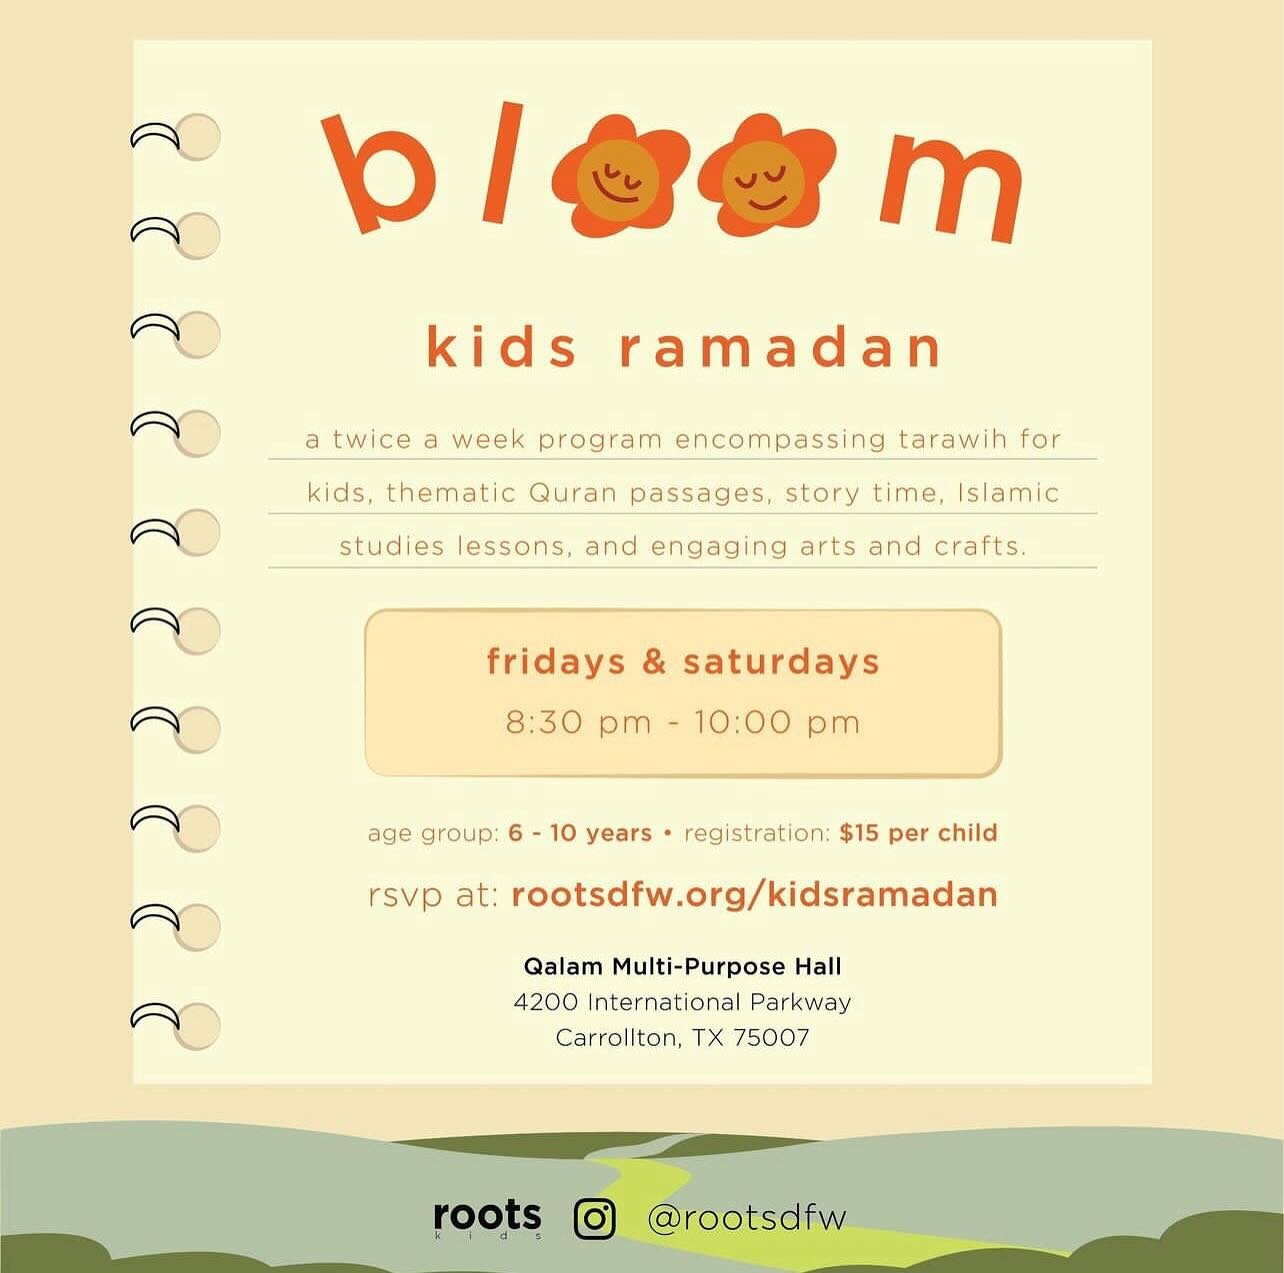 Each weekend in Ramadan, we offer a chance for our kids community to join in on fun Ramadan activities along with a Tarawih specific for children! 

Join us this Friday and Saturday by following the link in the flyer rootsdfw.org/kidsramadan to regis